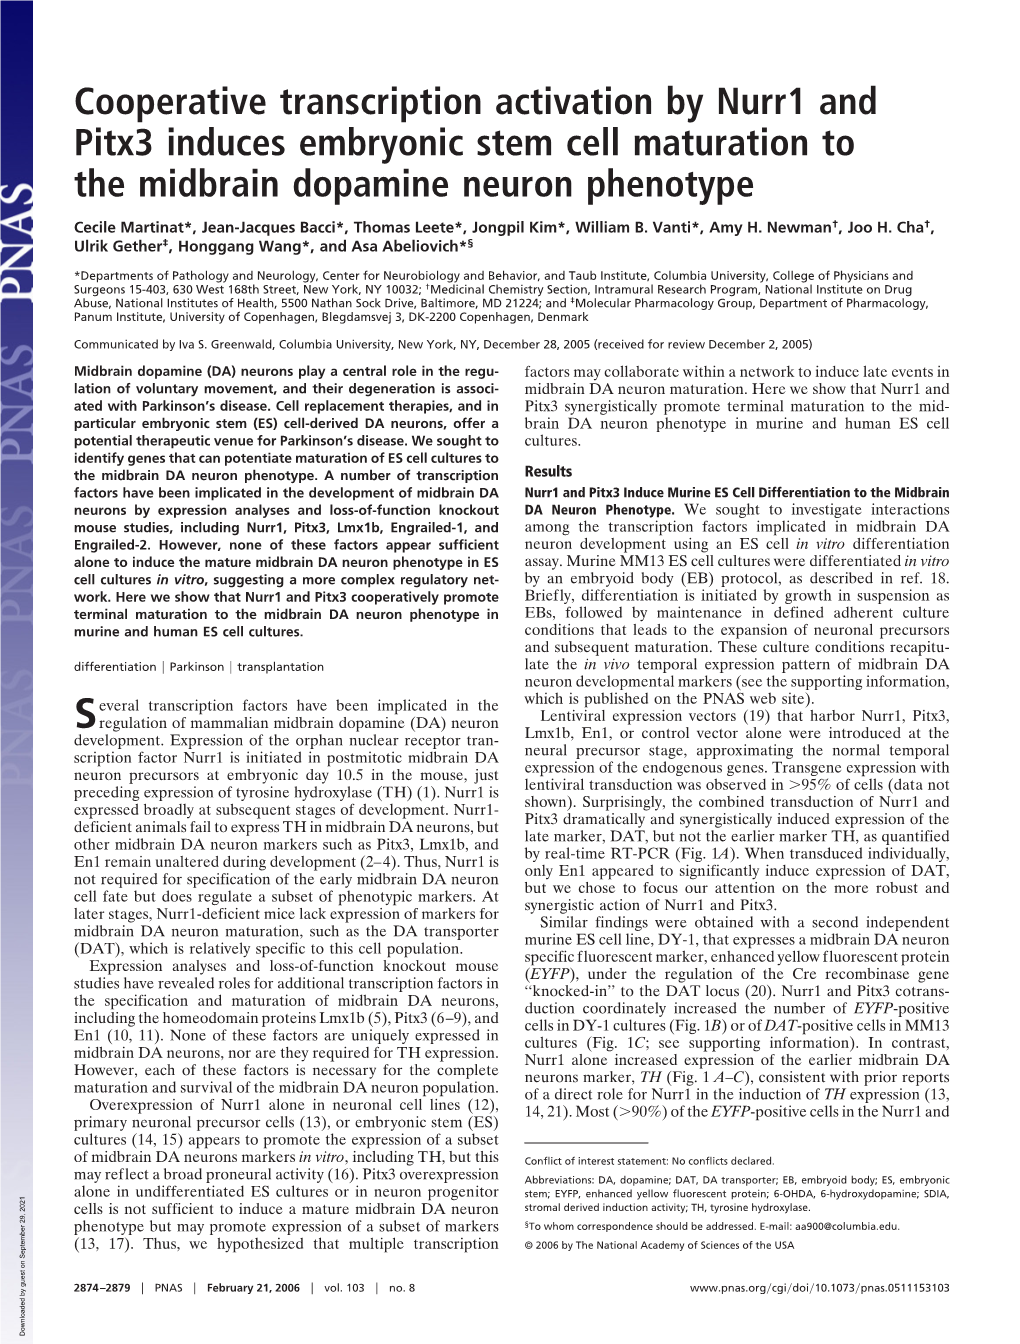 Cooperative Transcription Activation by Nurr1 and Pitx3 Induces Embryonic Stem Cell Maturation to the Midbrain Dopamine Neuron Phenotype